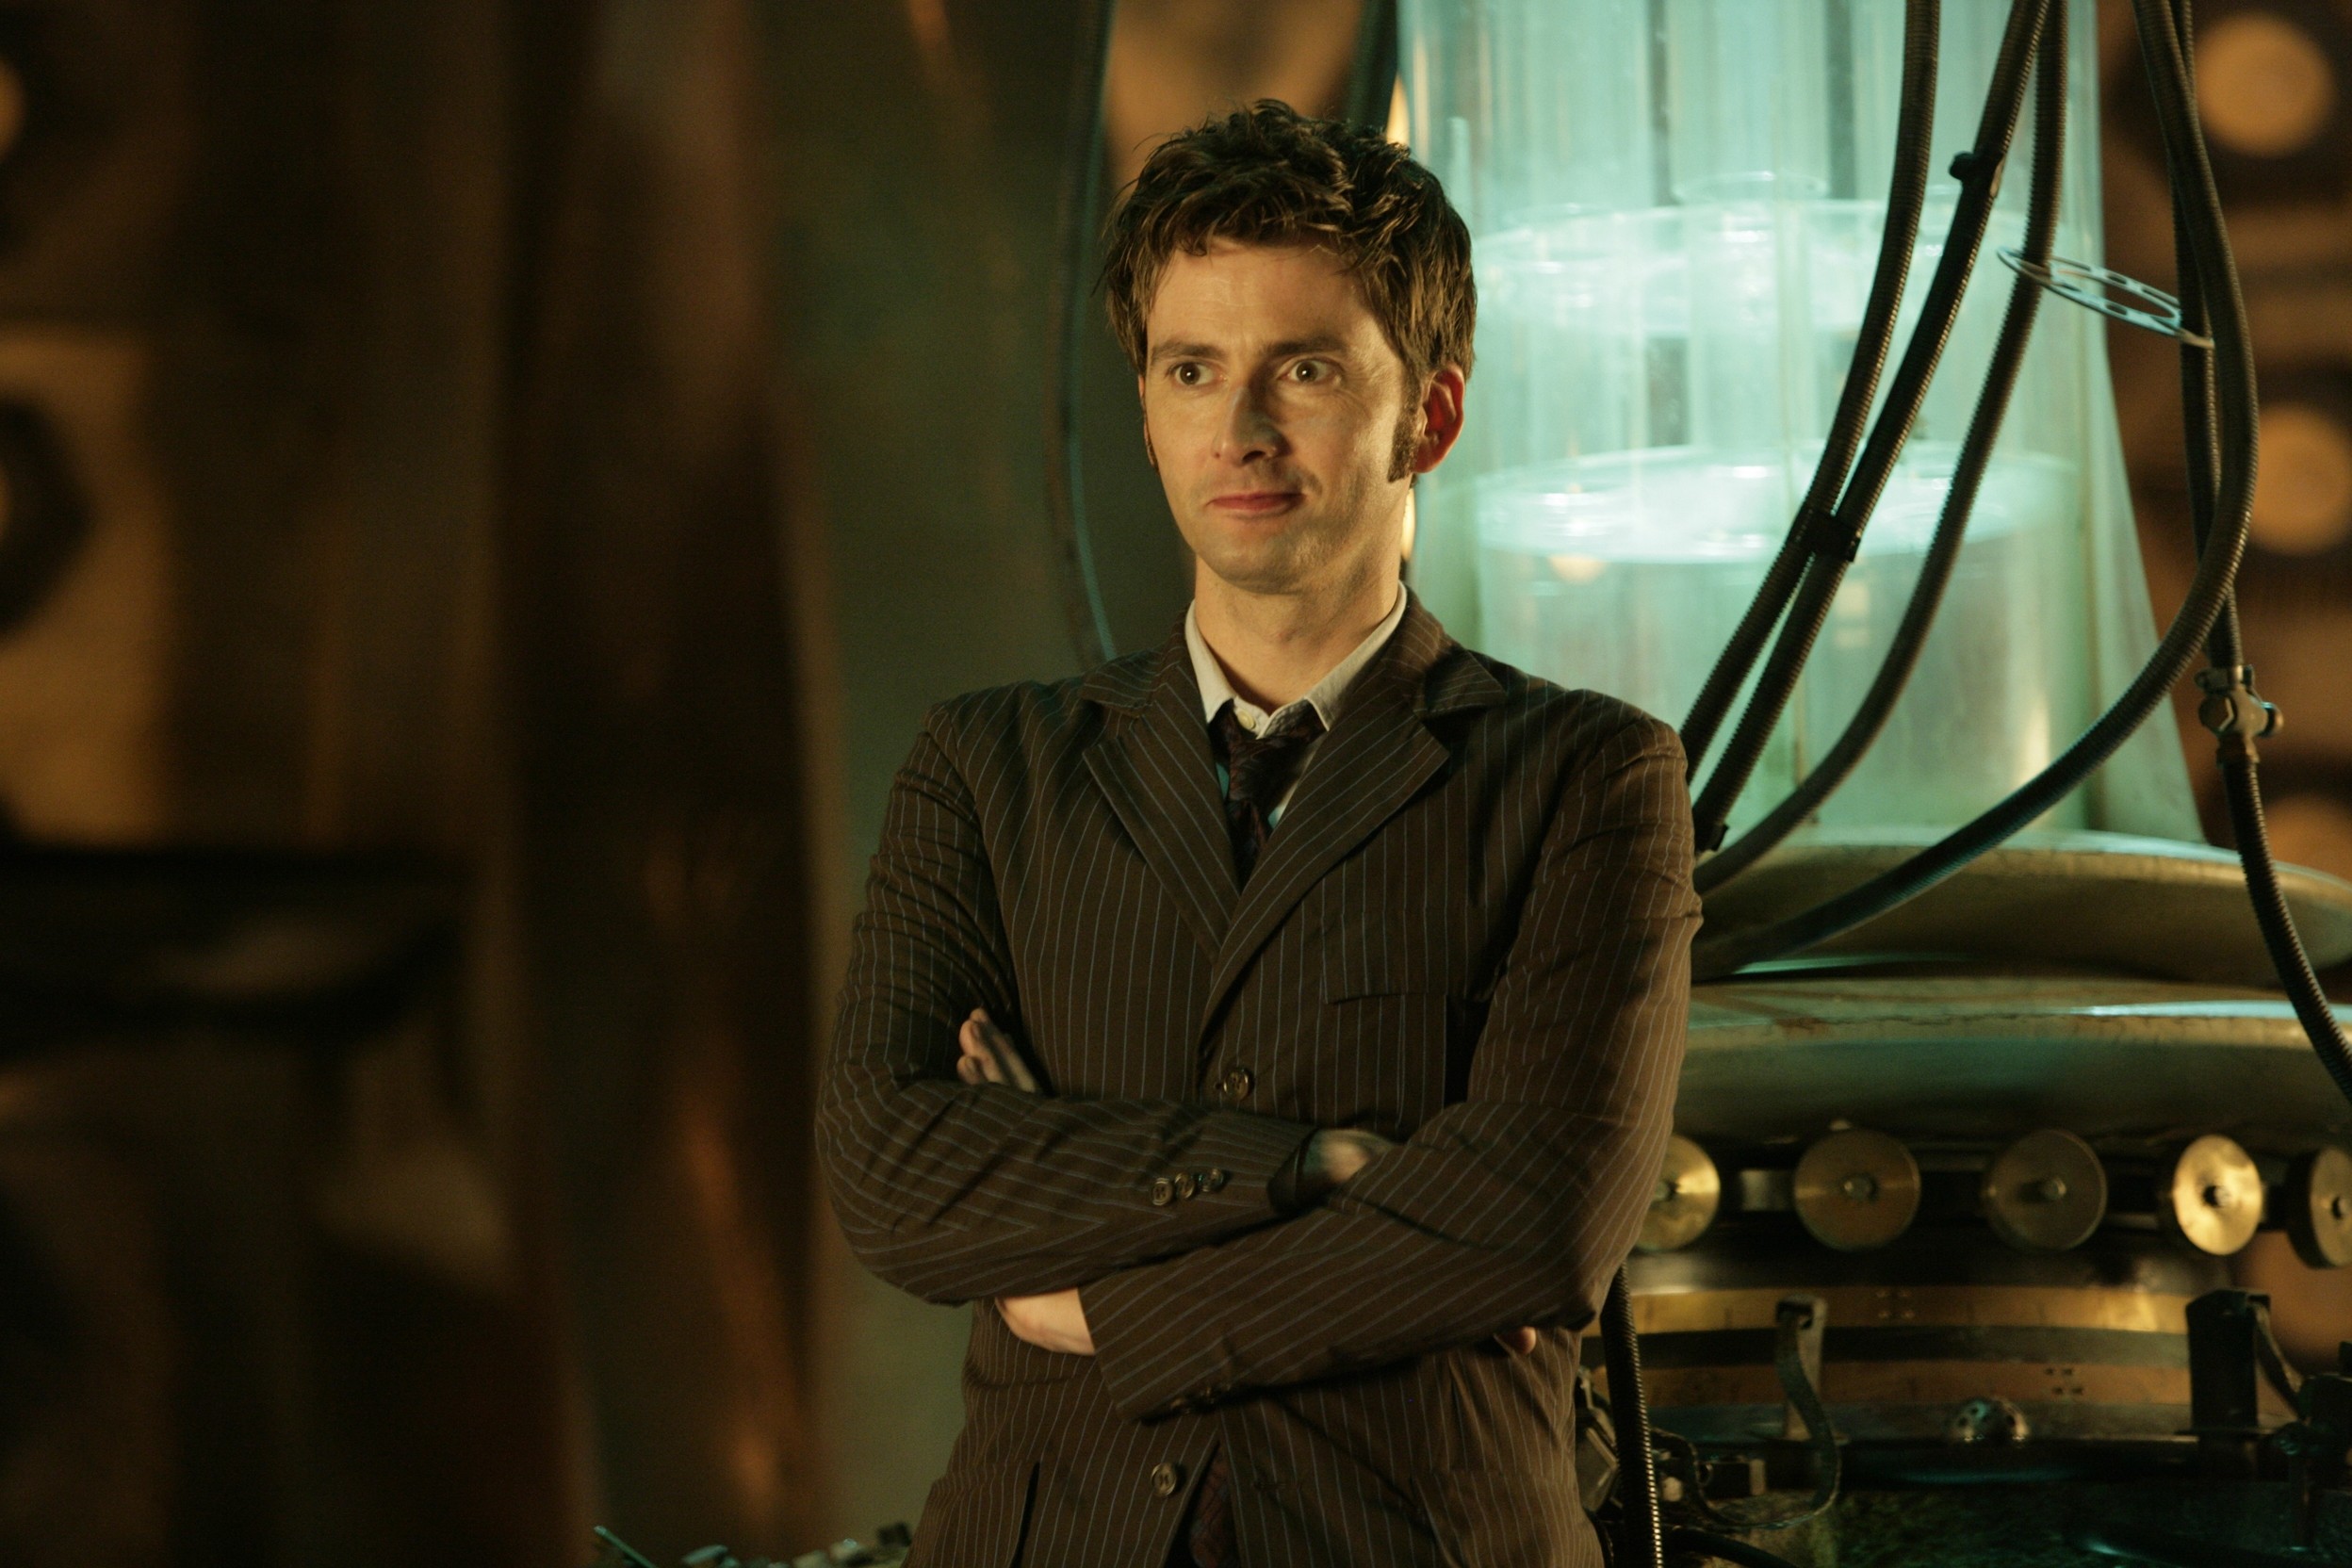 People 2496x1664 David Tennant Doctor Who Tenth Doctor TV series science fiction men